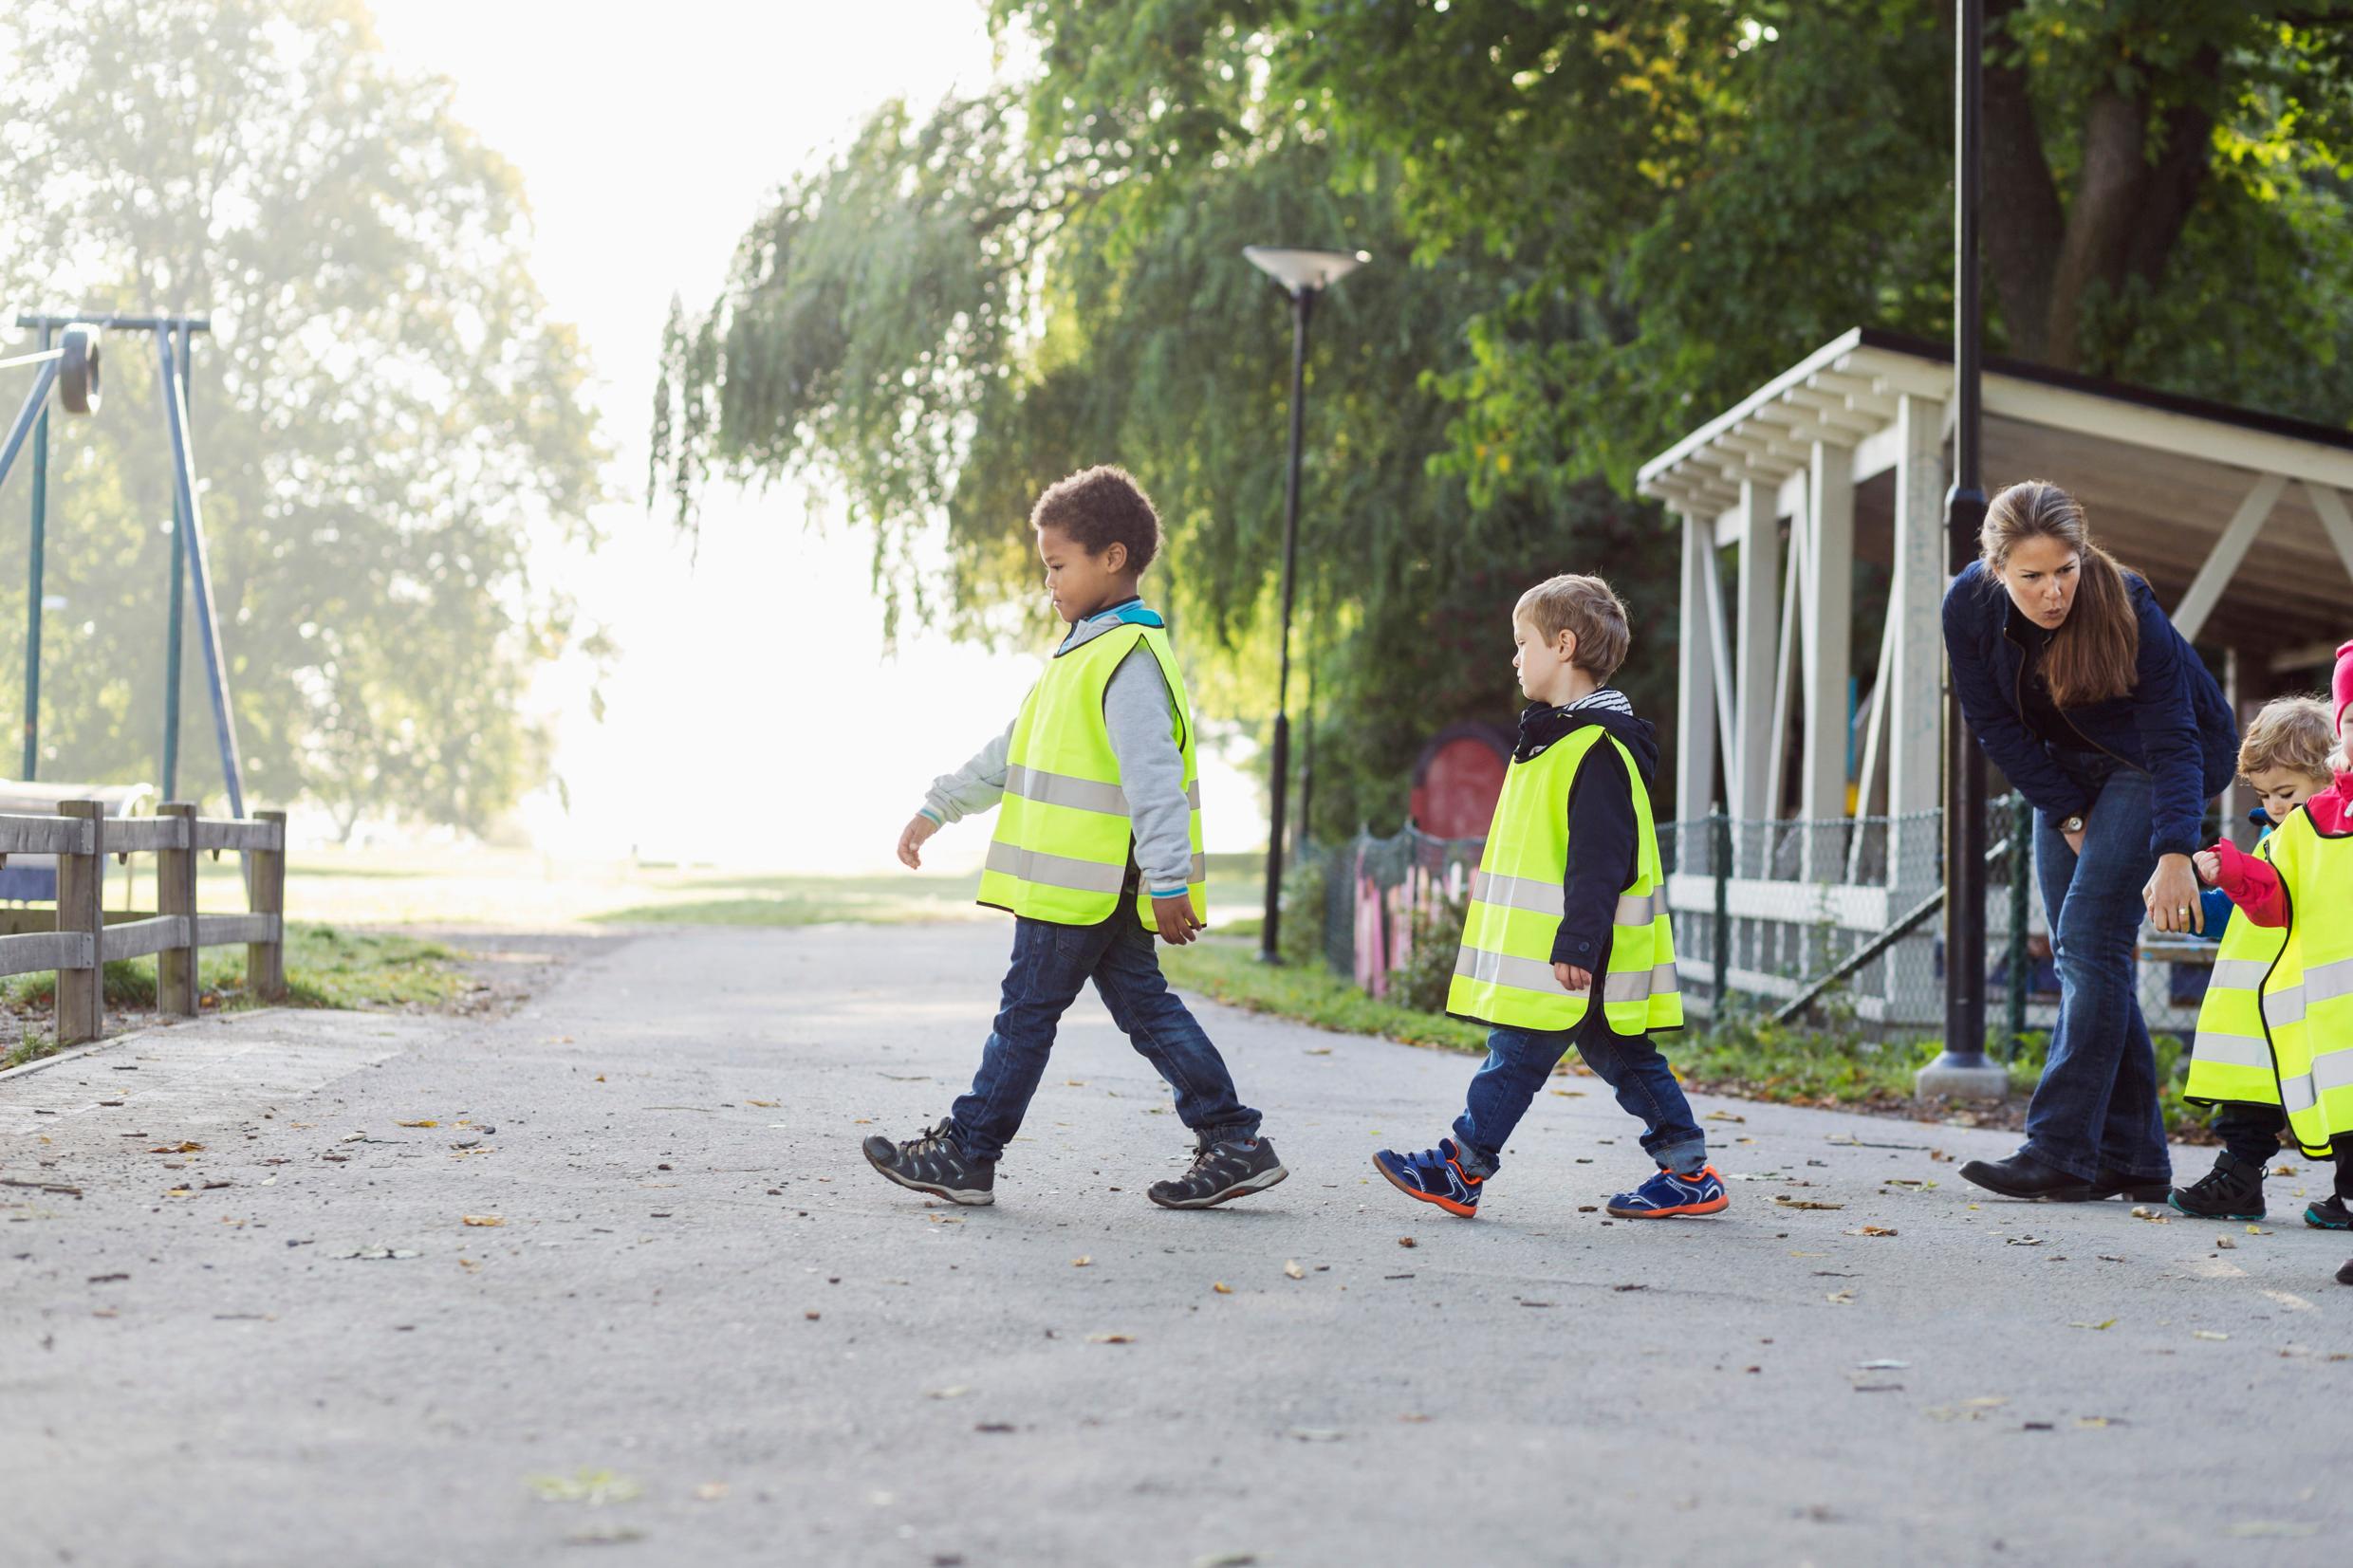 Young children wearing yellow high-visibility vests a crossing a footpath, a teacher seen on the right.